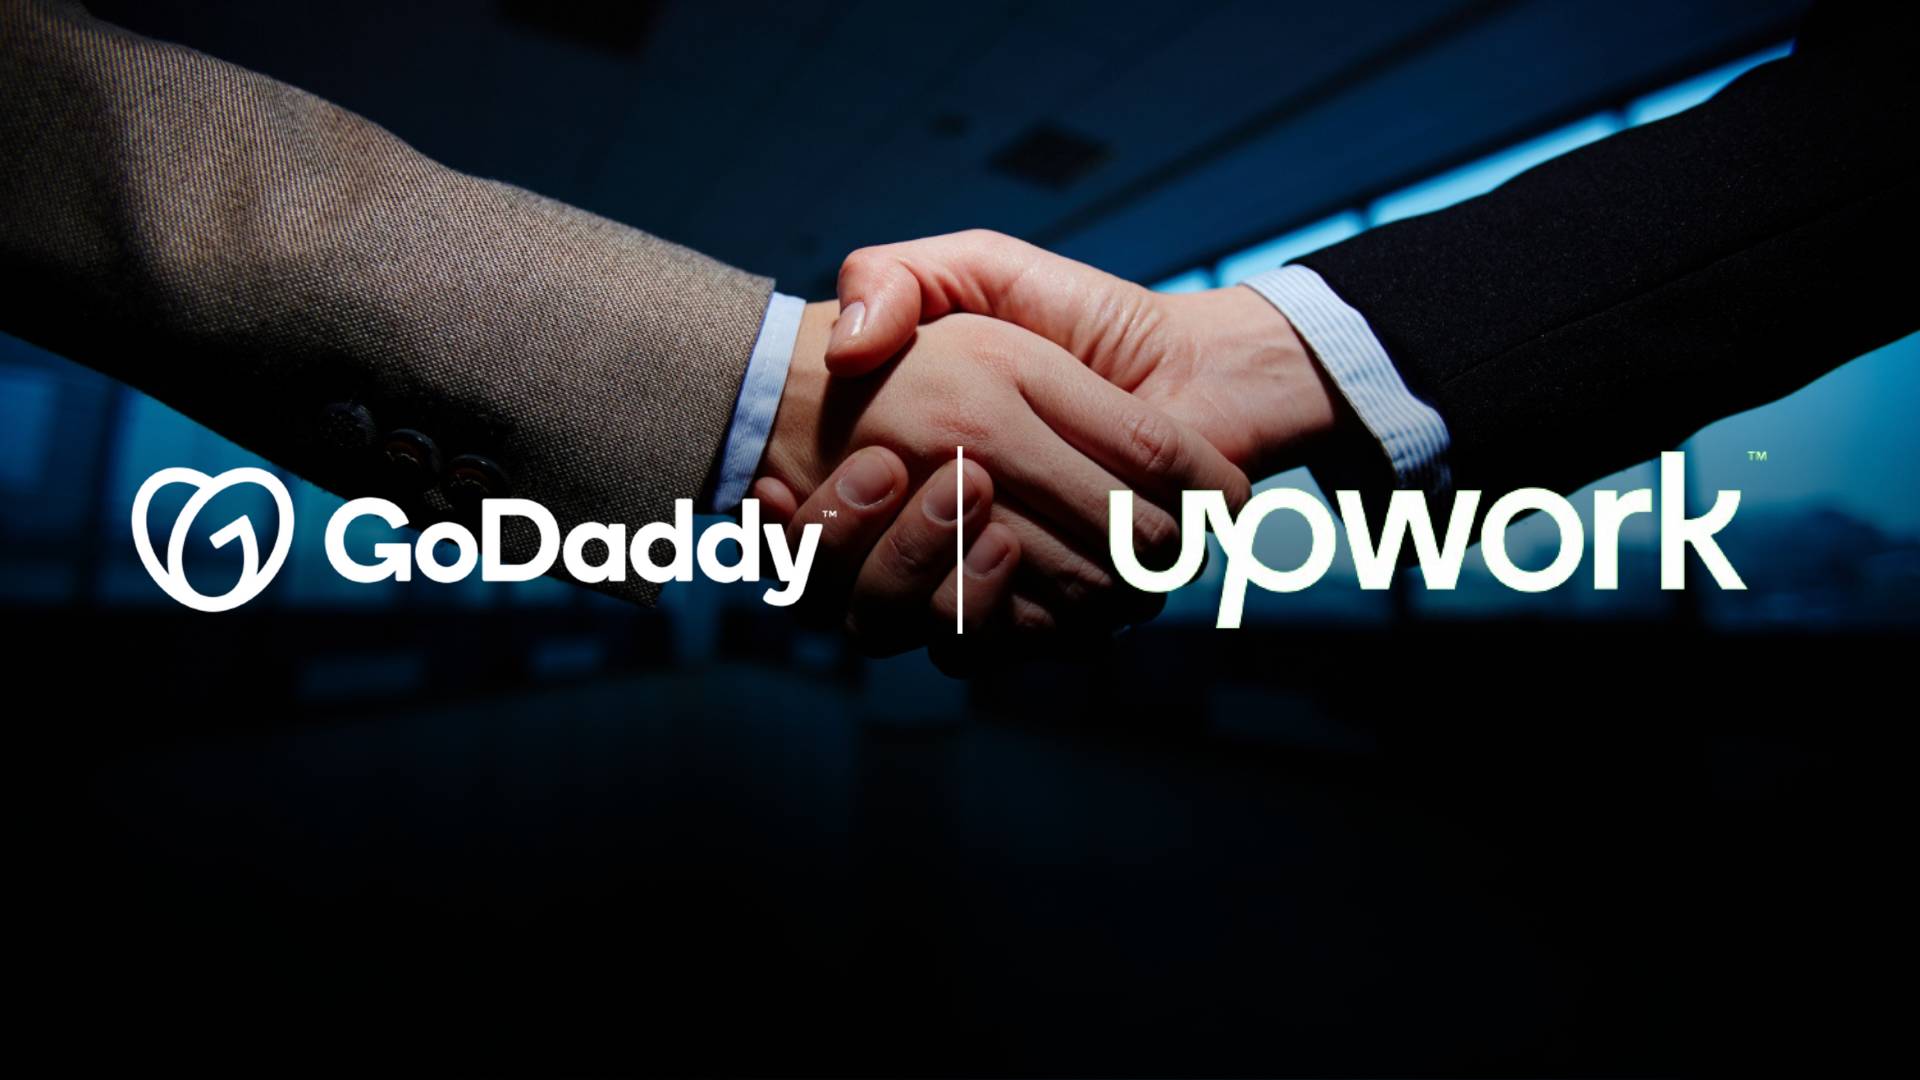 GoDaddy Partners with Upwork to Empower Web Designers and Developers